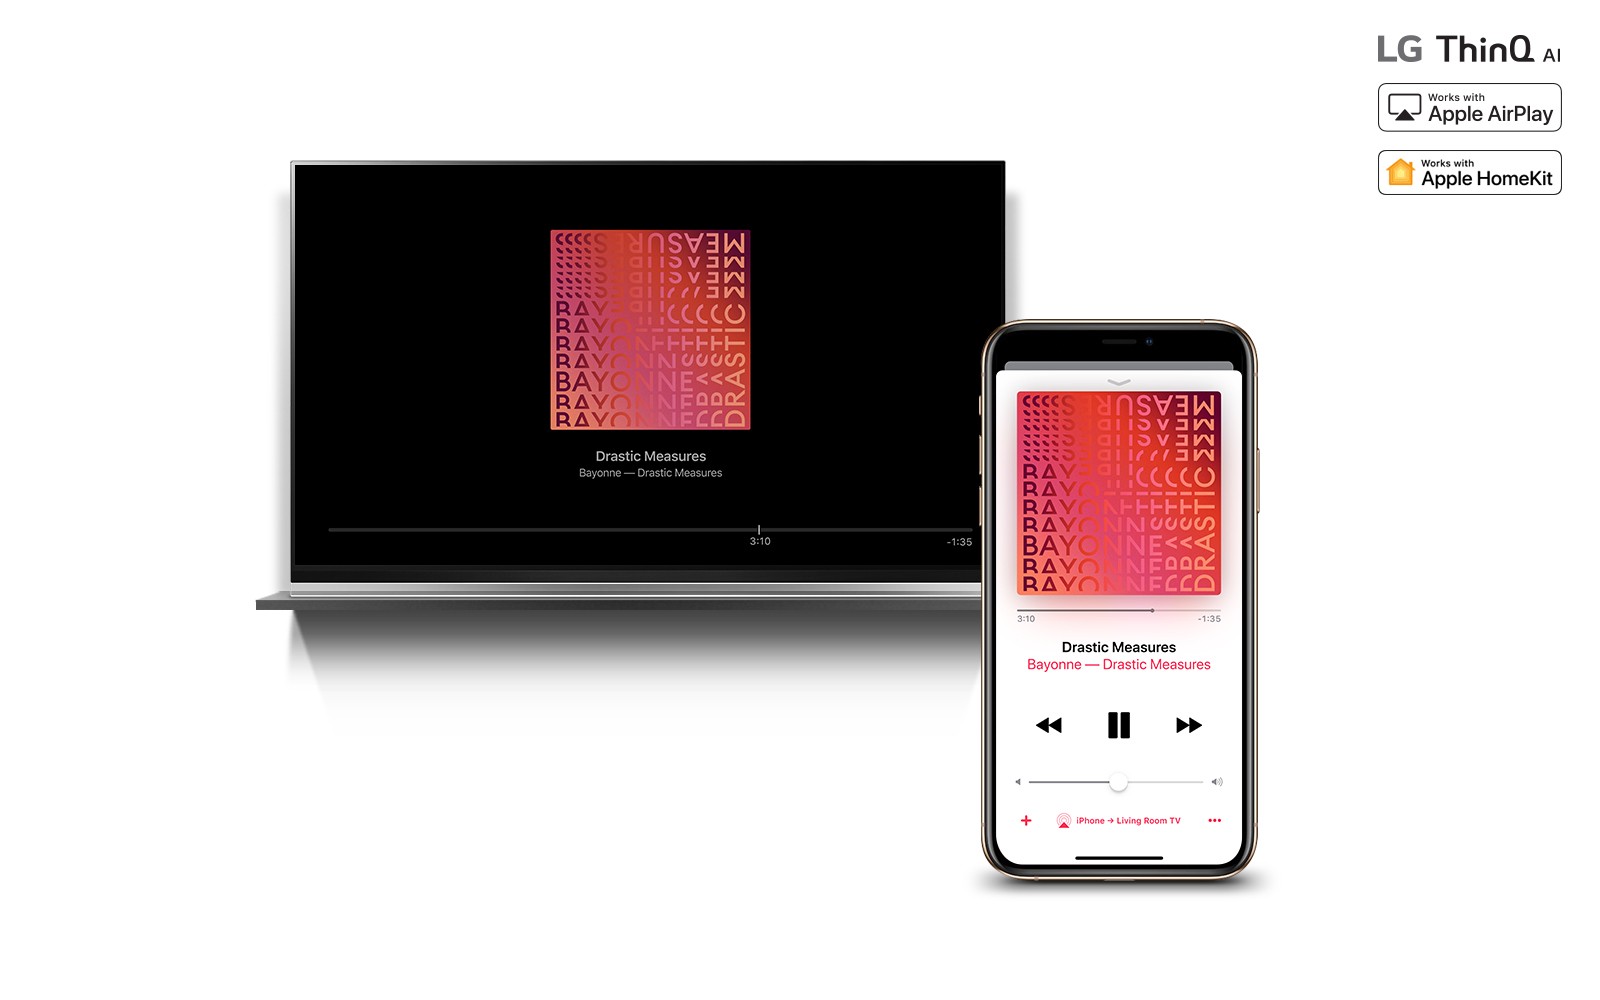 LG ThinQ AI TV streaming music content from an iPhone through AirPlay2